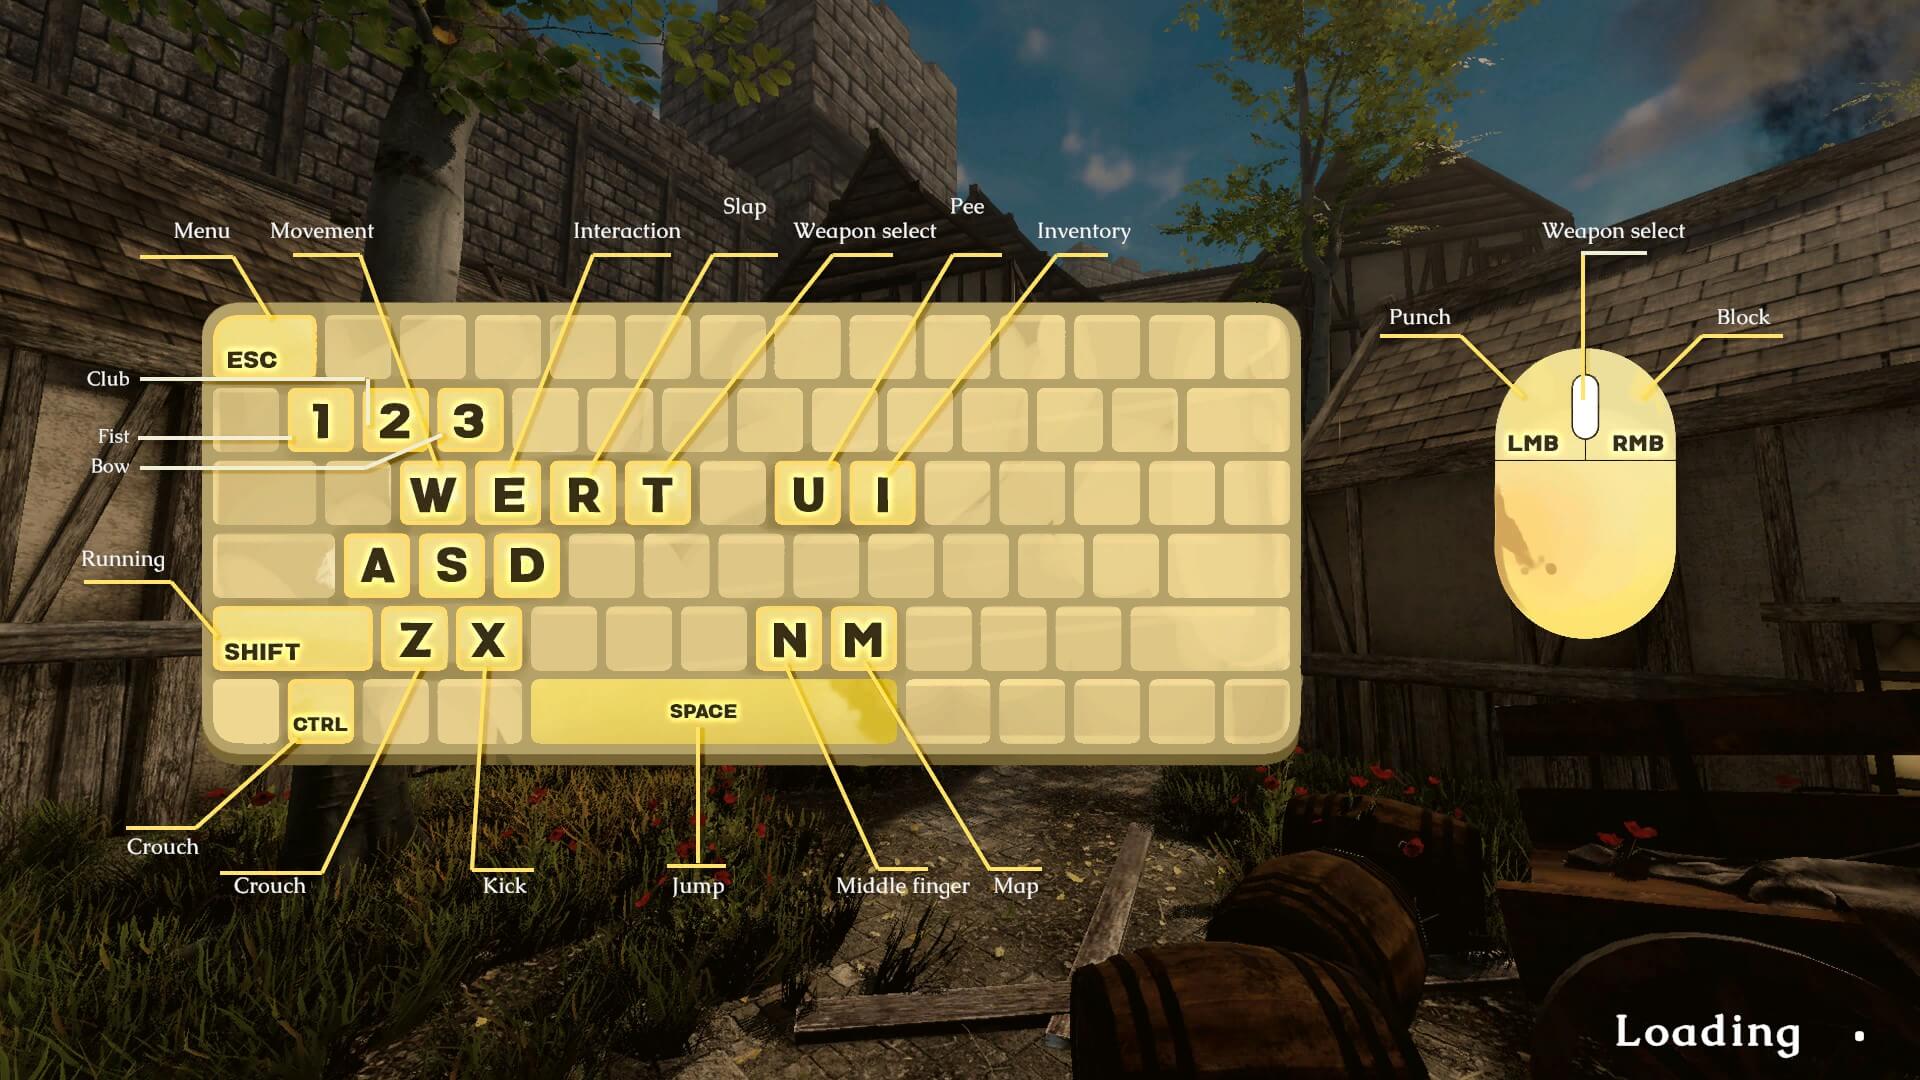 A large depiction of the keyboard layout is on the screen with all the possible commands listed.